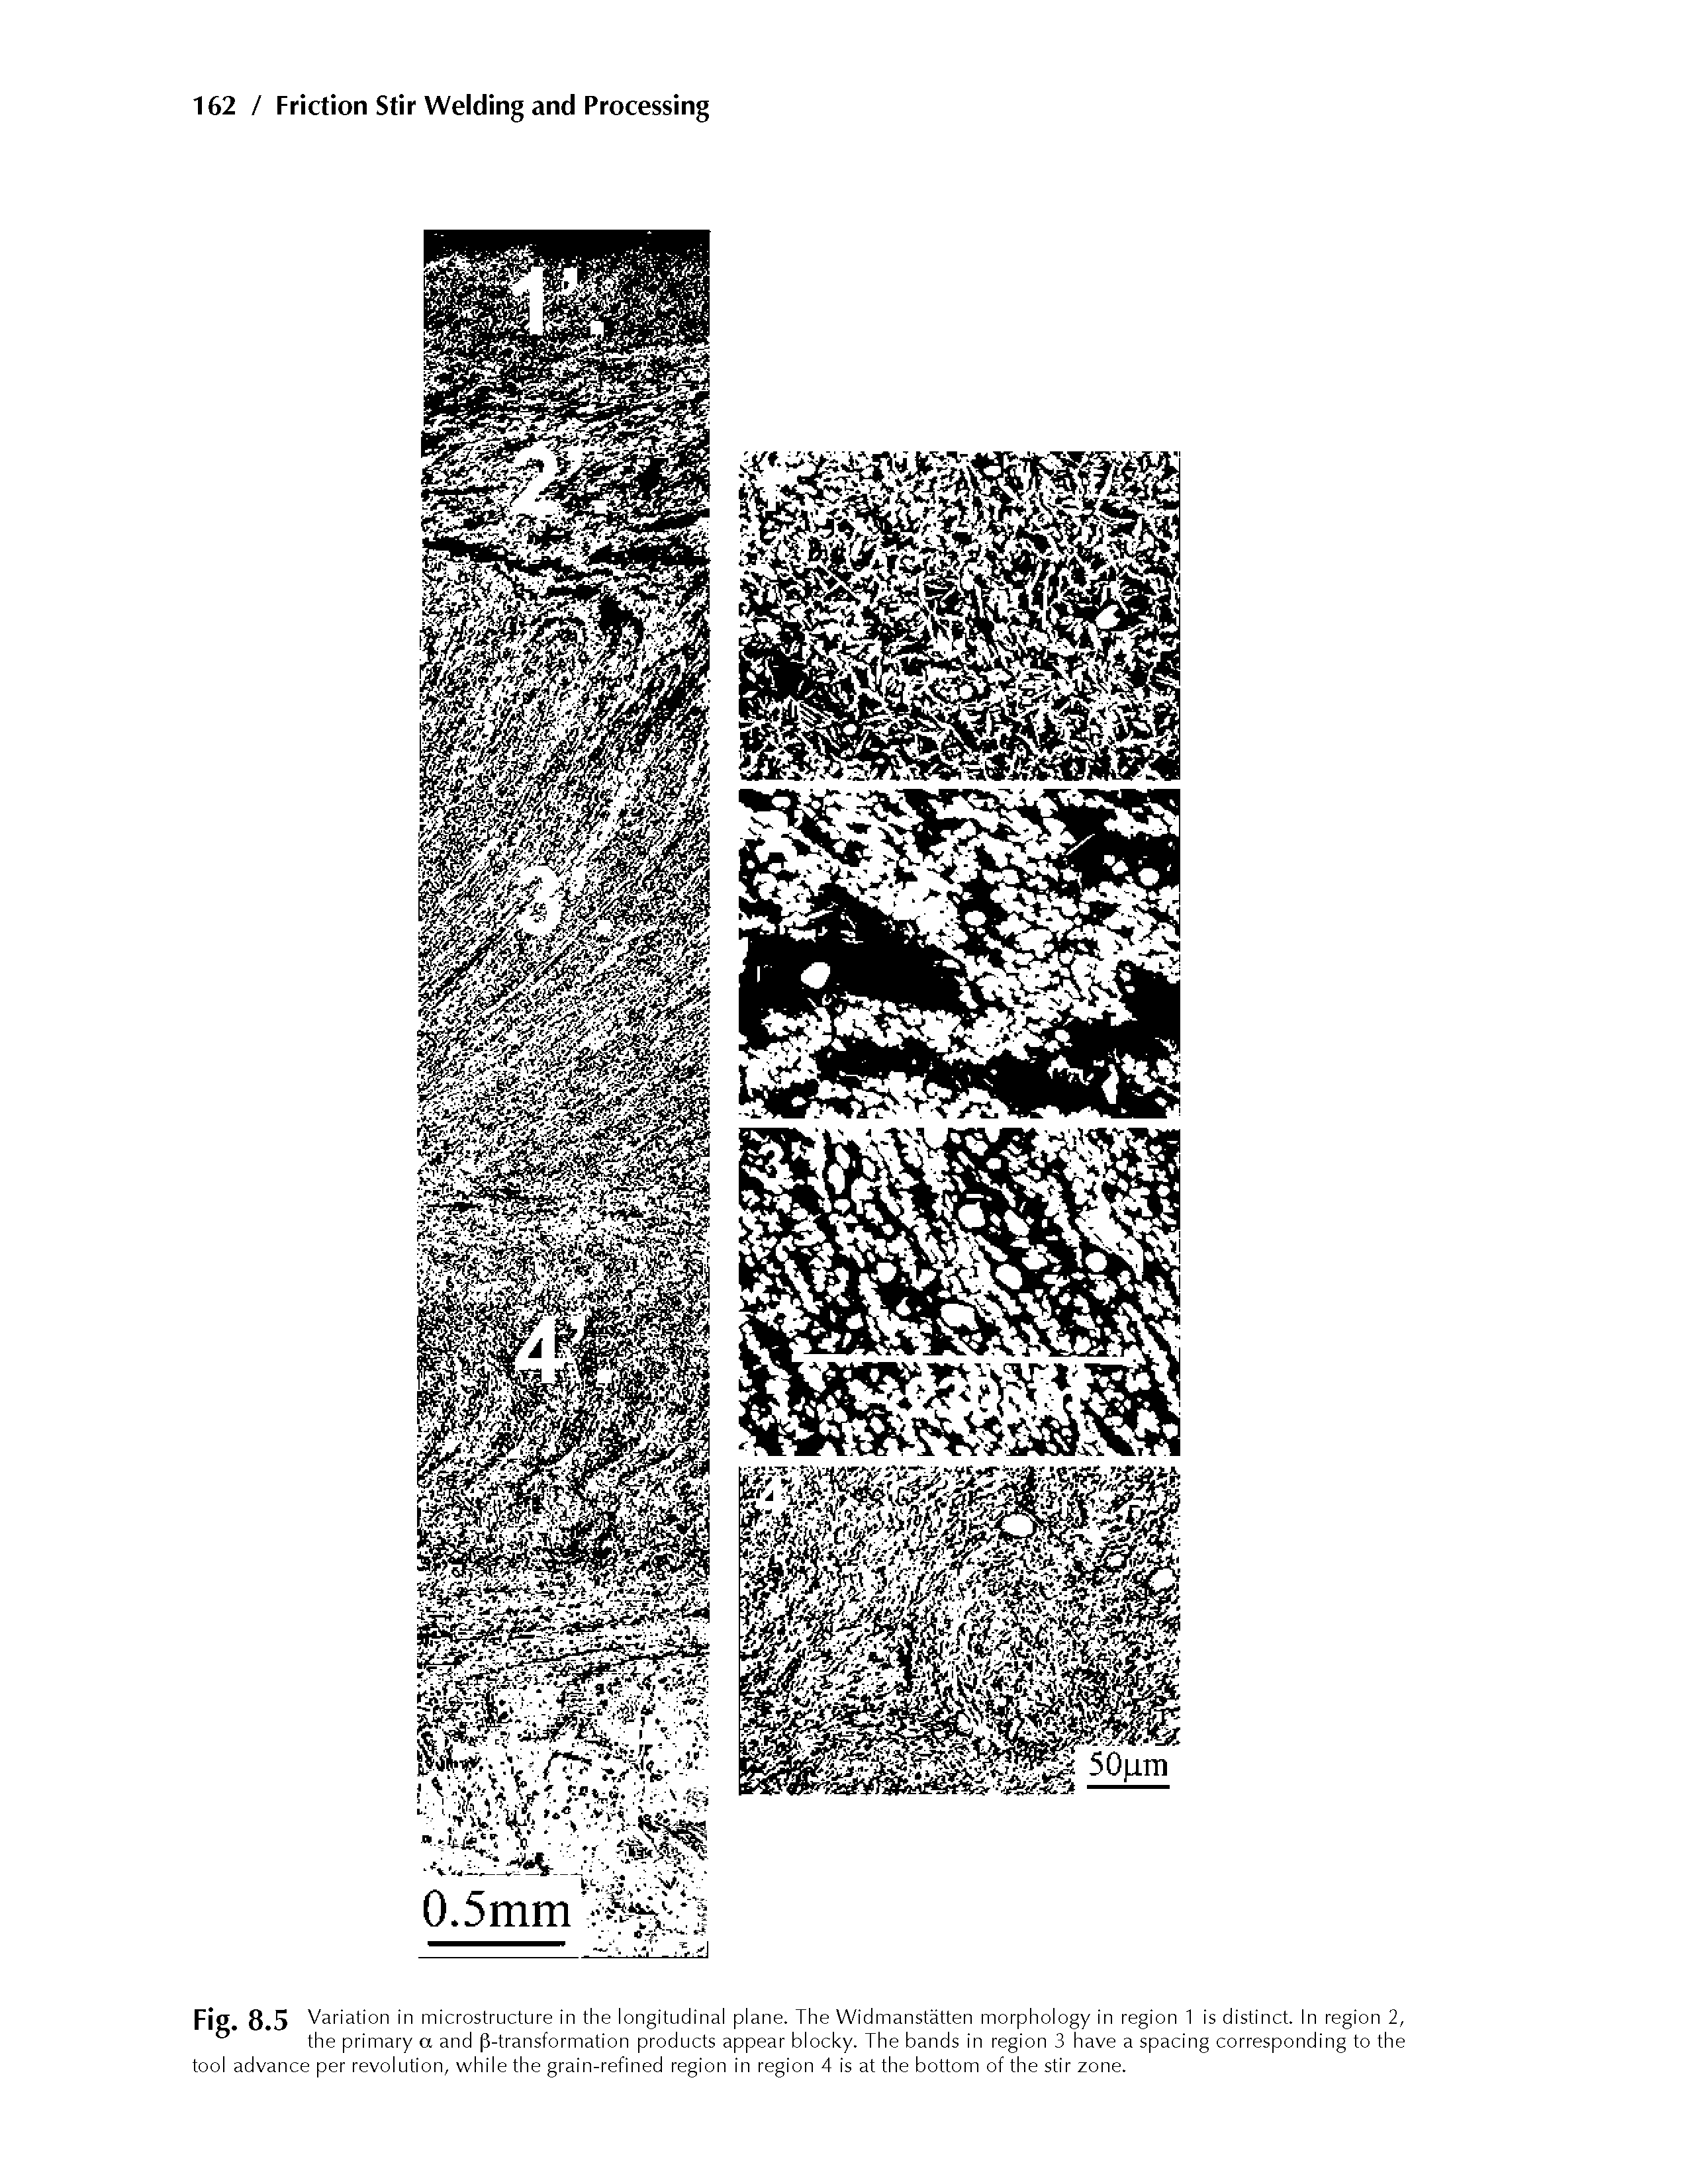 Fig. 8.5 Variation in microstructure in the longitudinal plane. The Widmanstatten morphology in region 1 is distinct. In region 2, the primary a and -transformation products appear blocky. The bands in region 3 have a spacing corresponding to the tool advance per revolution, while the grain-refined region in region 4 is at the bottom of the stir zone.